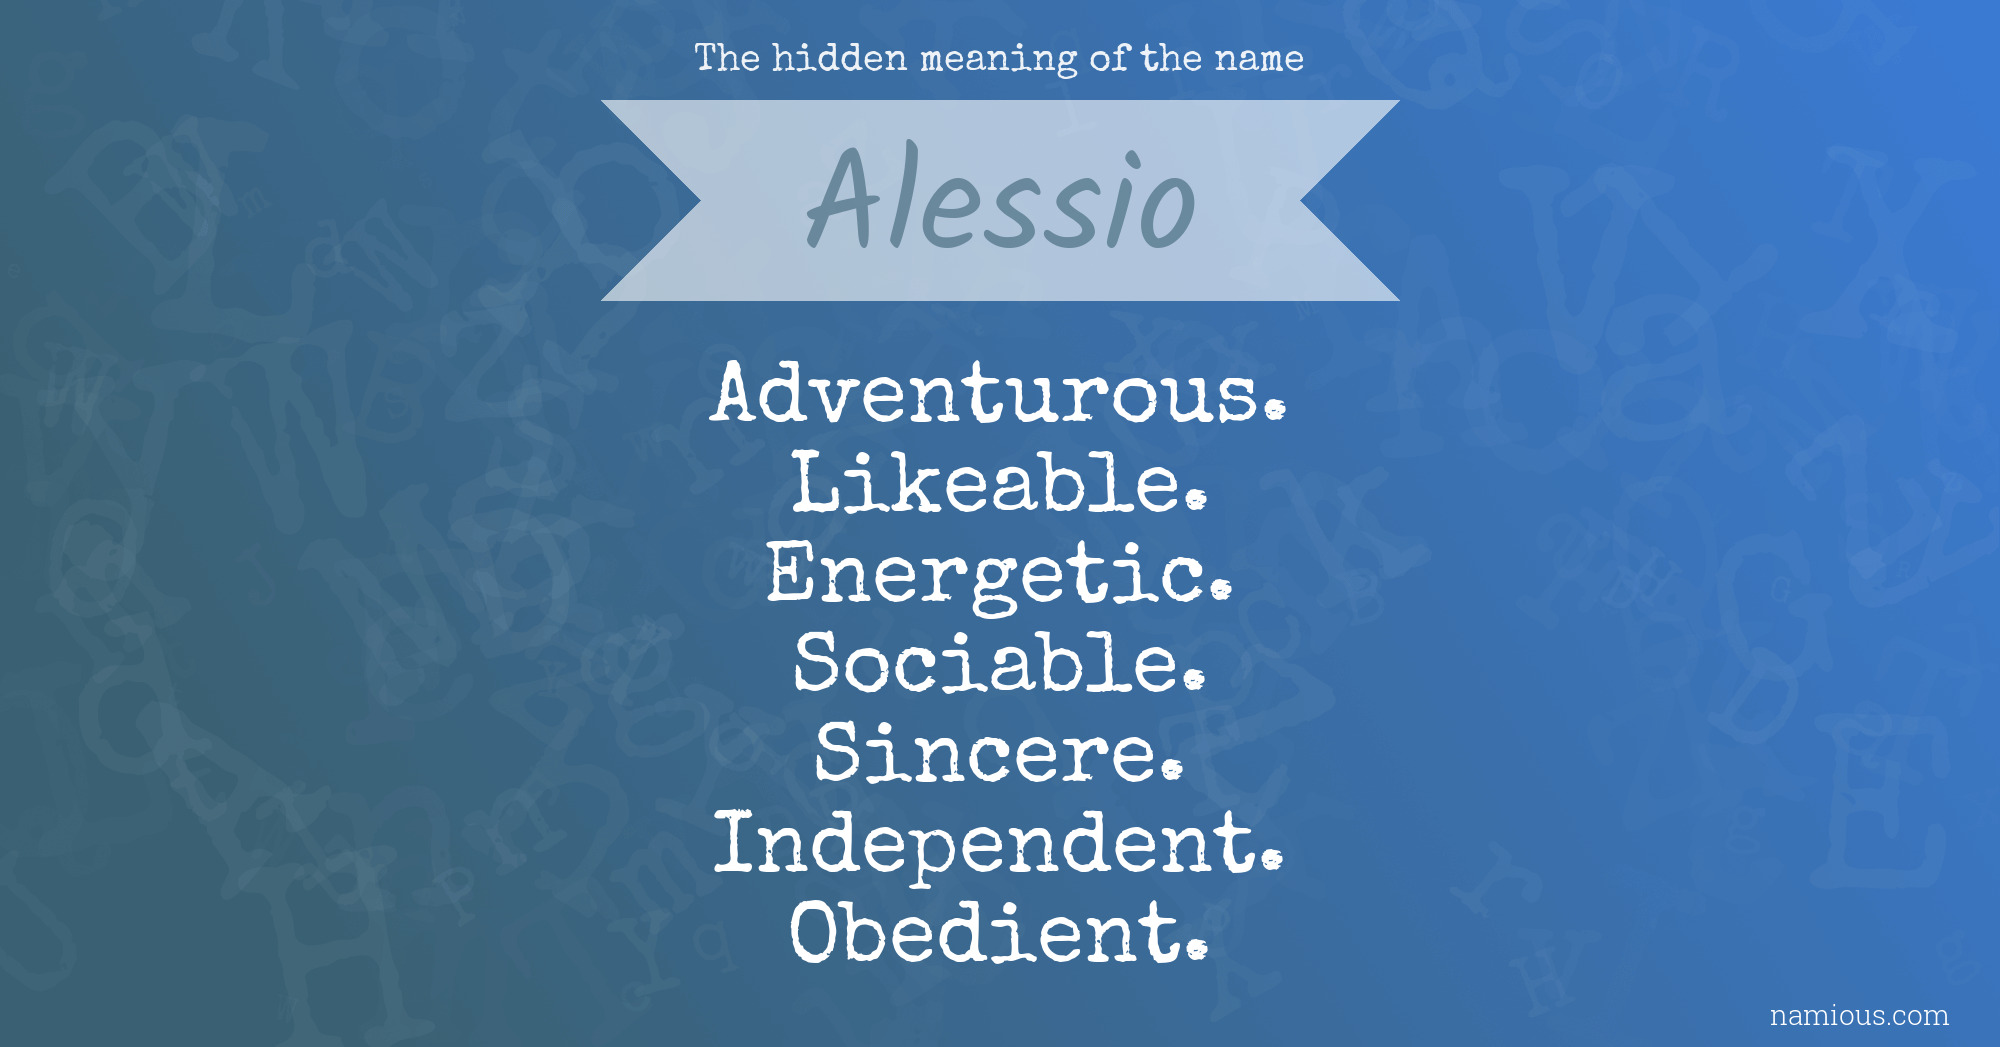 The hidden meaning of the name Alessio